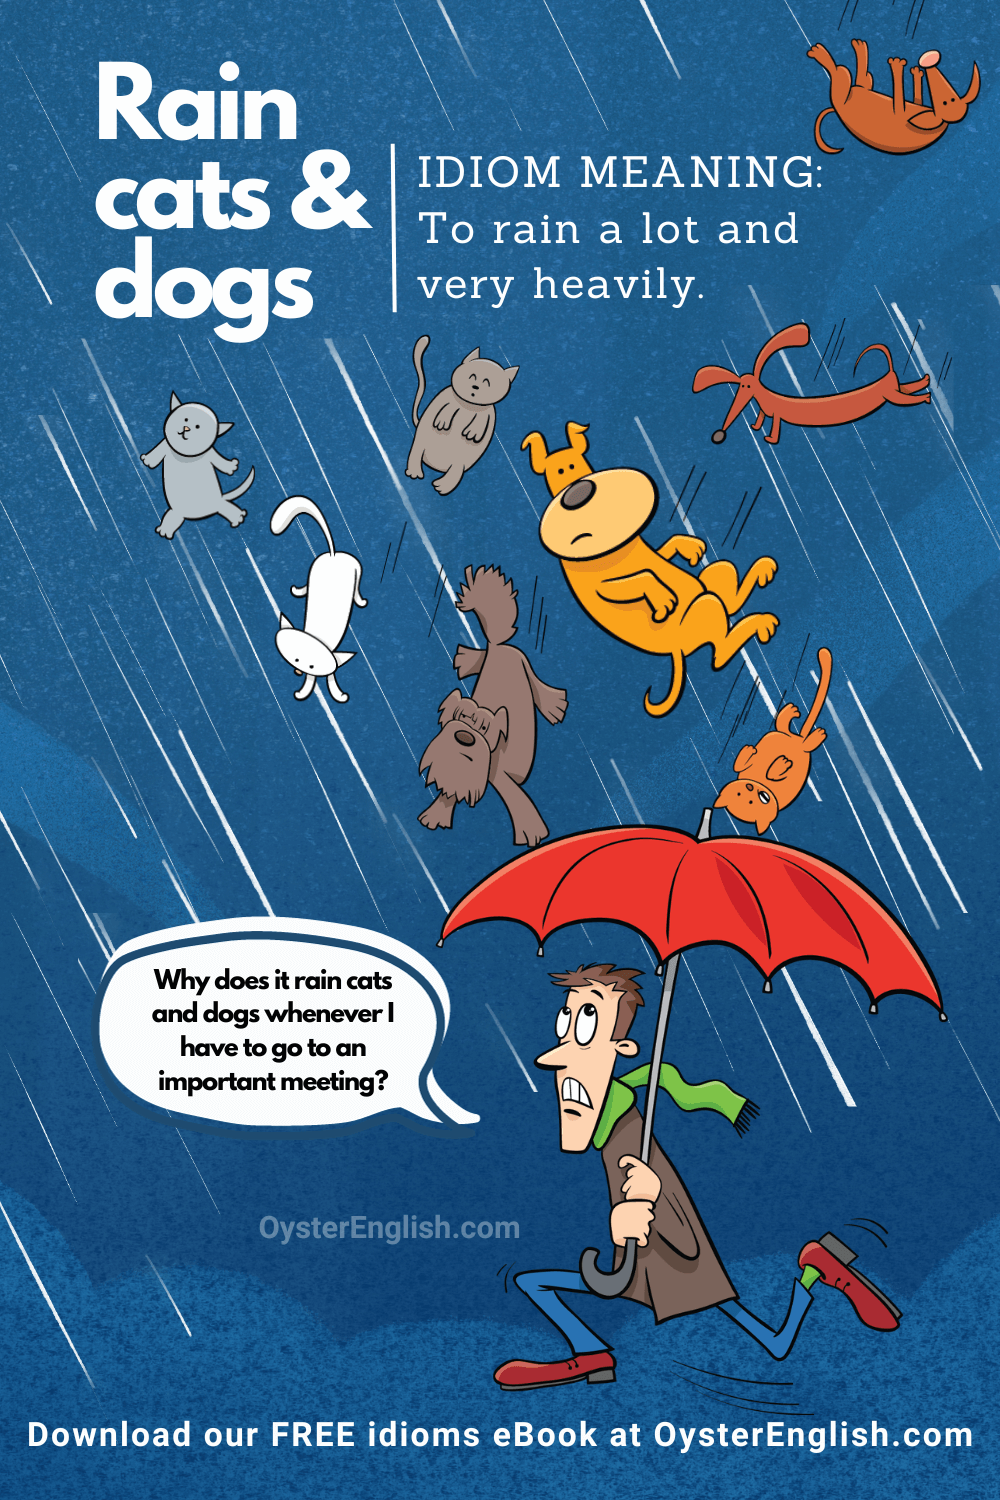 Cartoon illustration of a man with an umbrella running as cats and dogs rain down from the sky, representing the idiom 'raining cats and dogs'.